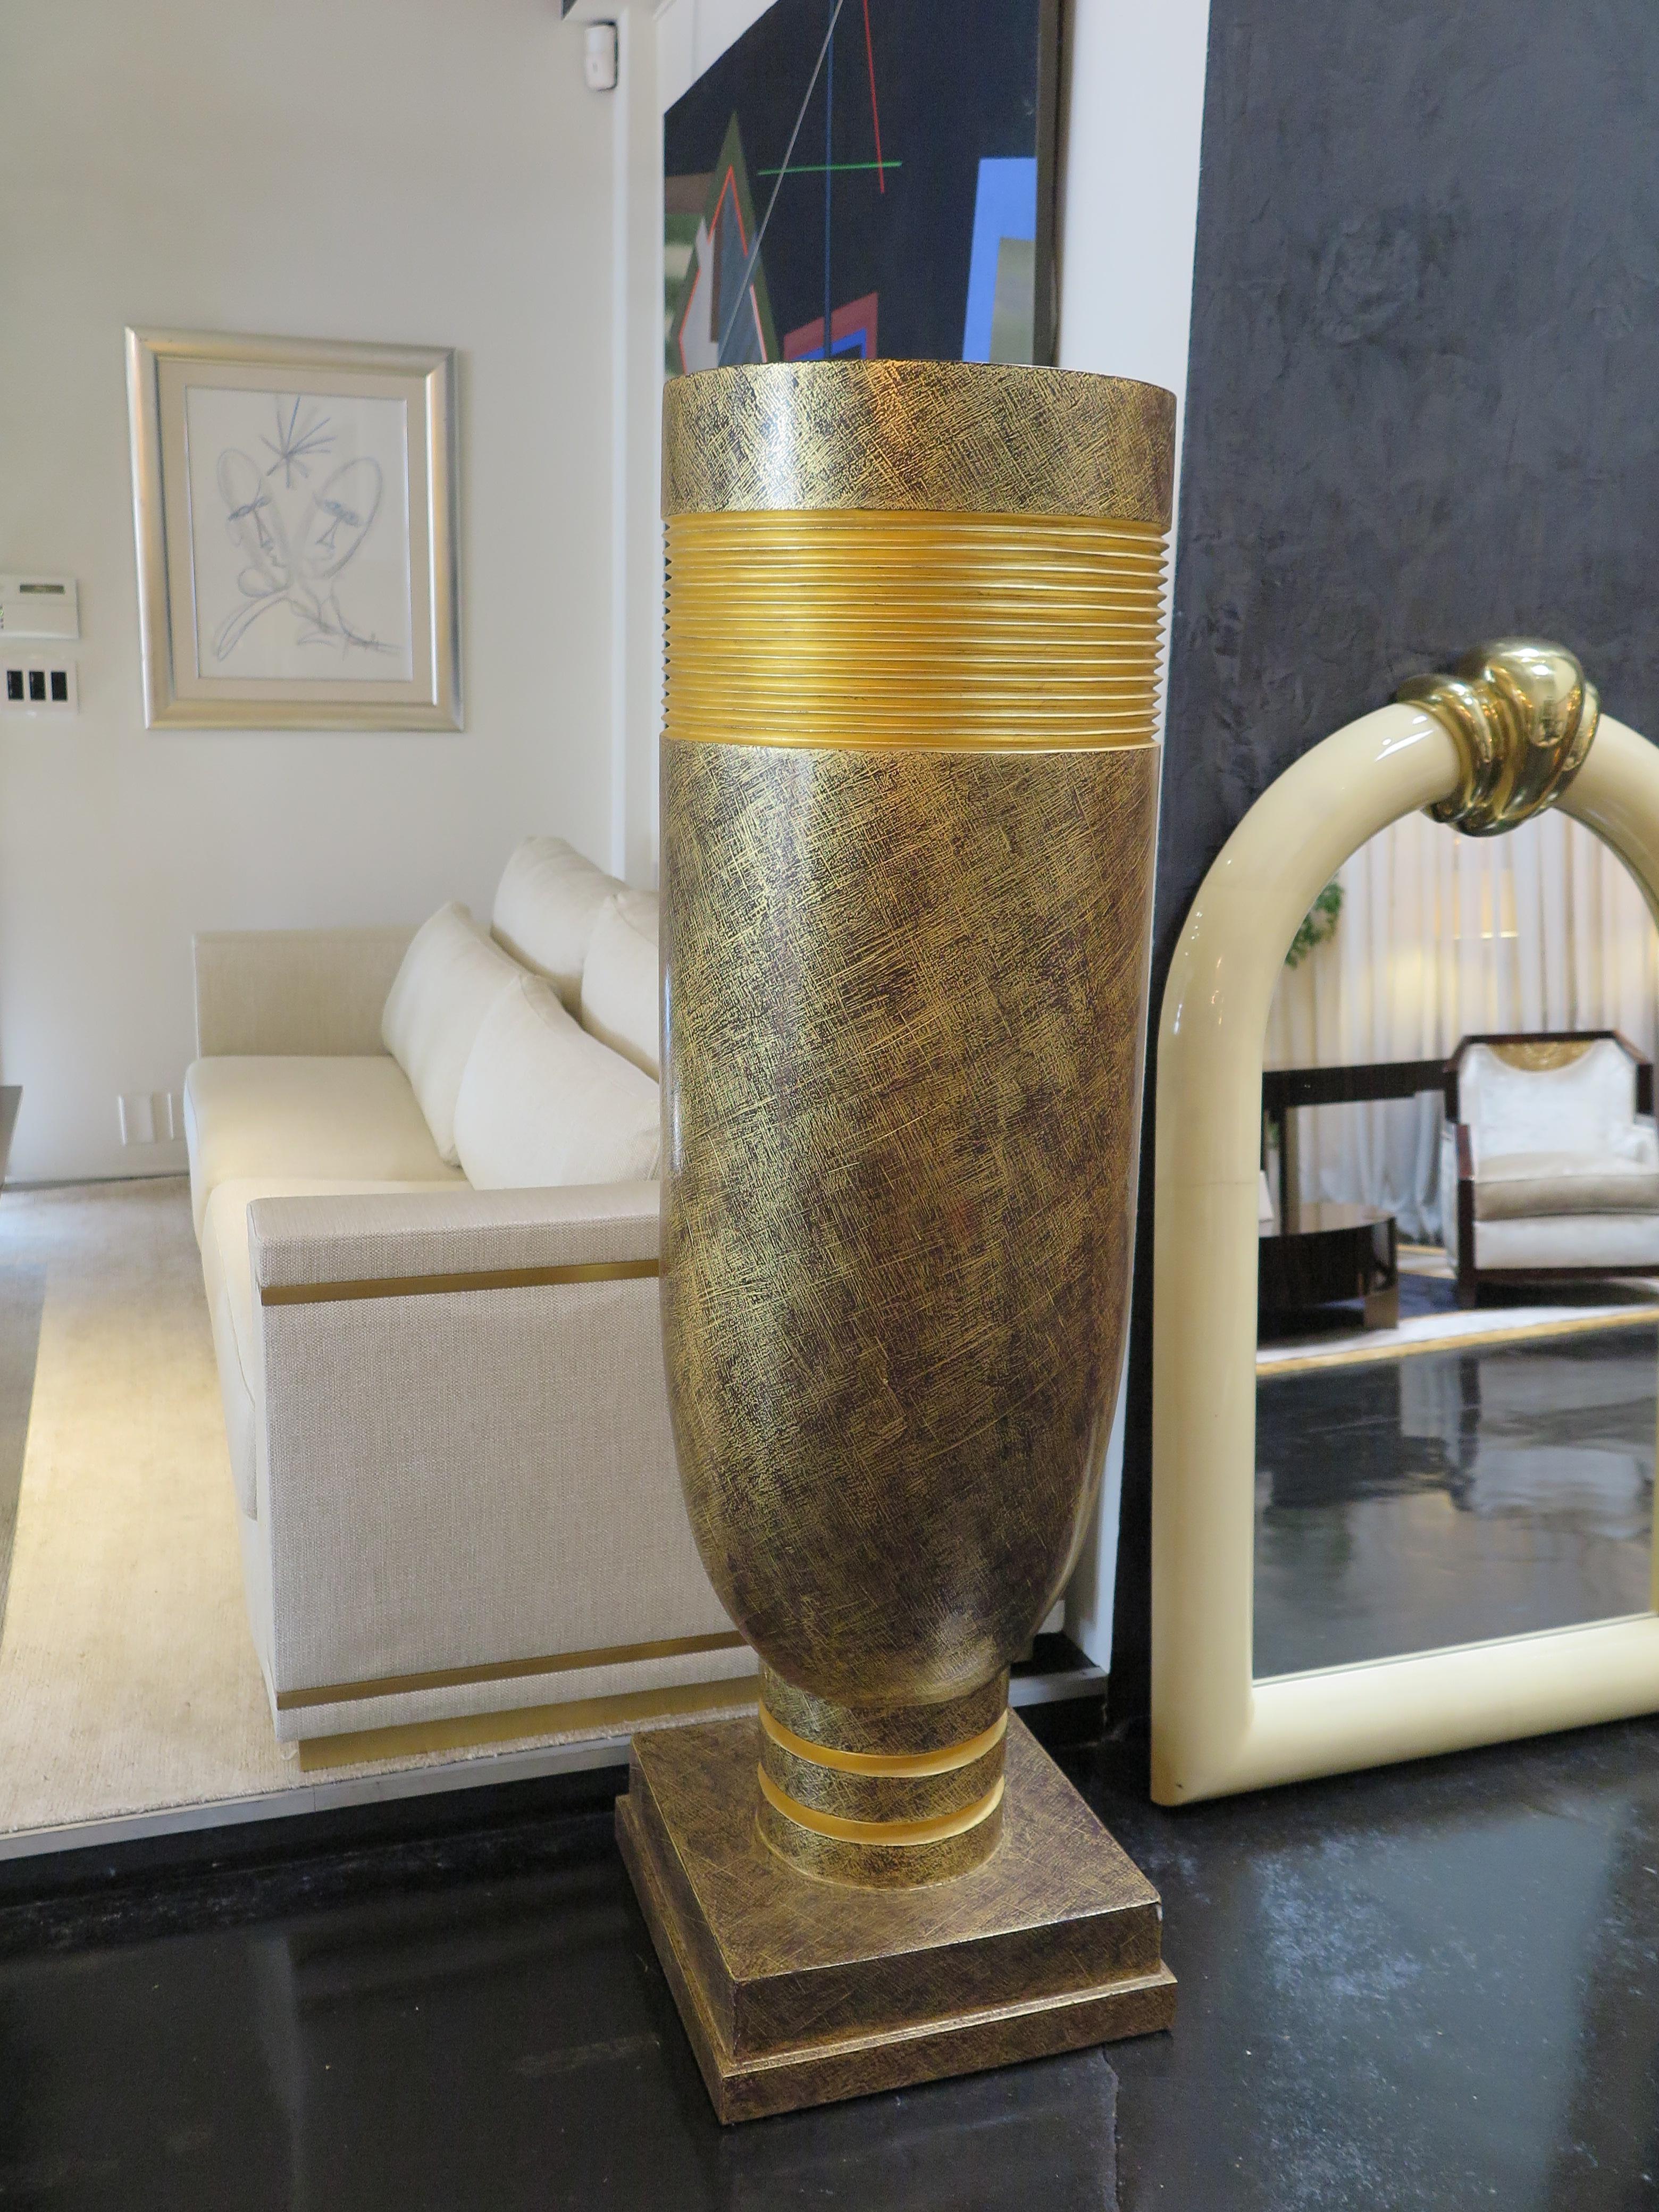 These extra large vases/decorative urns feature plaster basins with a golden patina finish with black accents. Originally created as oversized torchieres, they can be repurposed as stunning vases with plant or flower arrangements. Impressively large